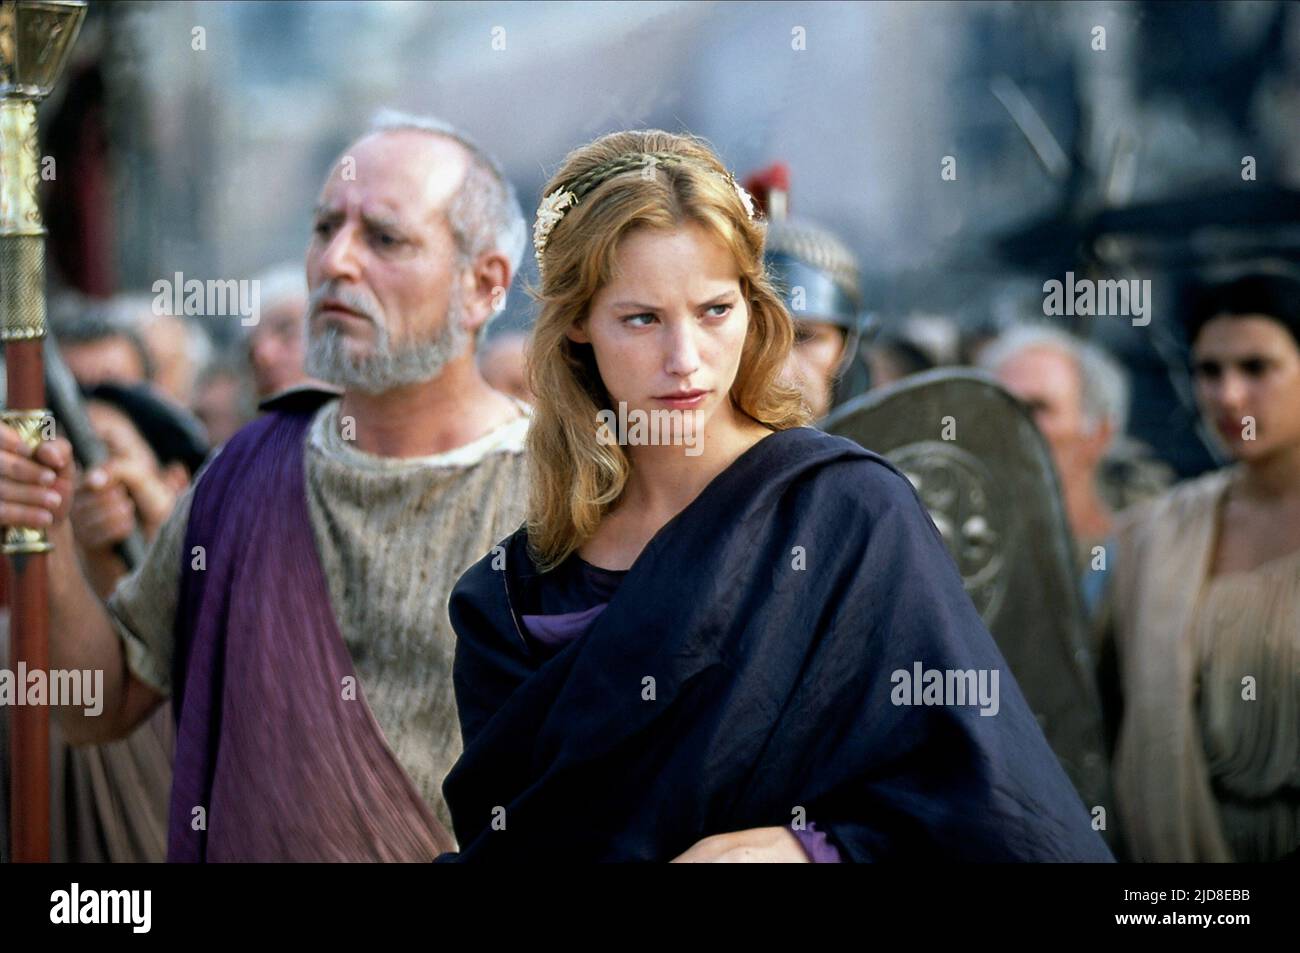 SIENNA GUILLORY, HELEN OF TROY, 2003, Stock Photo